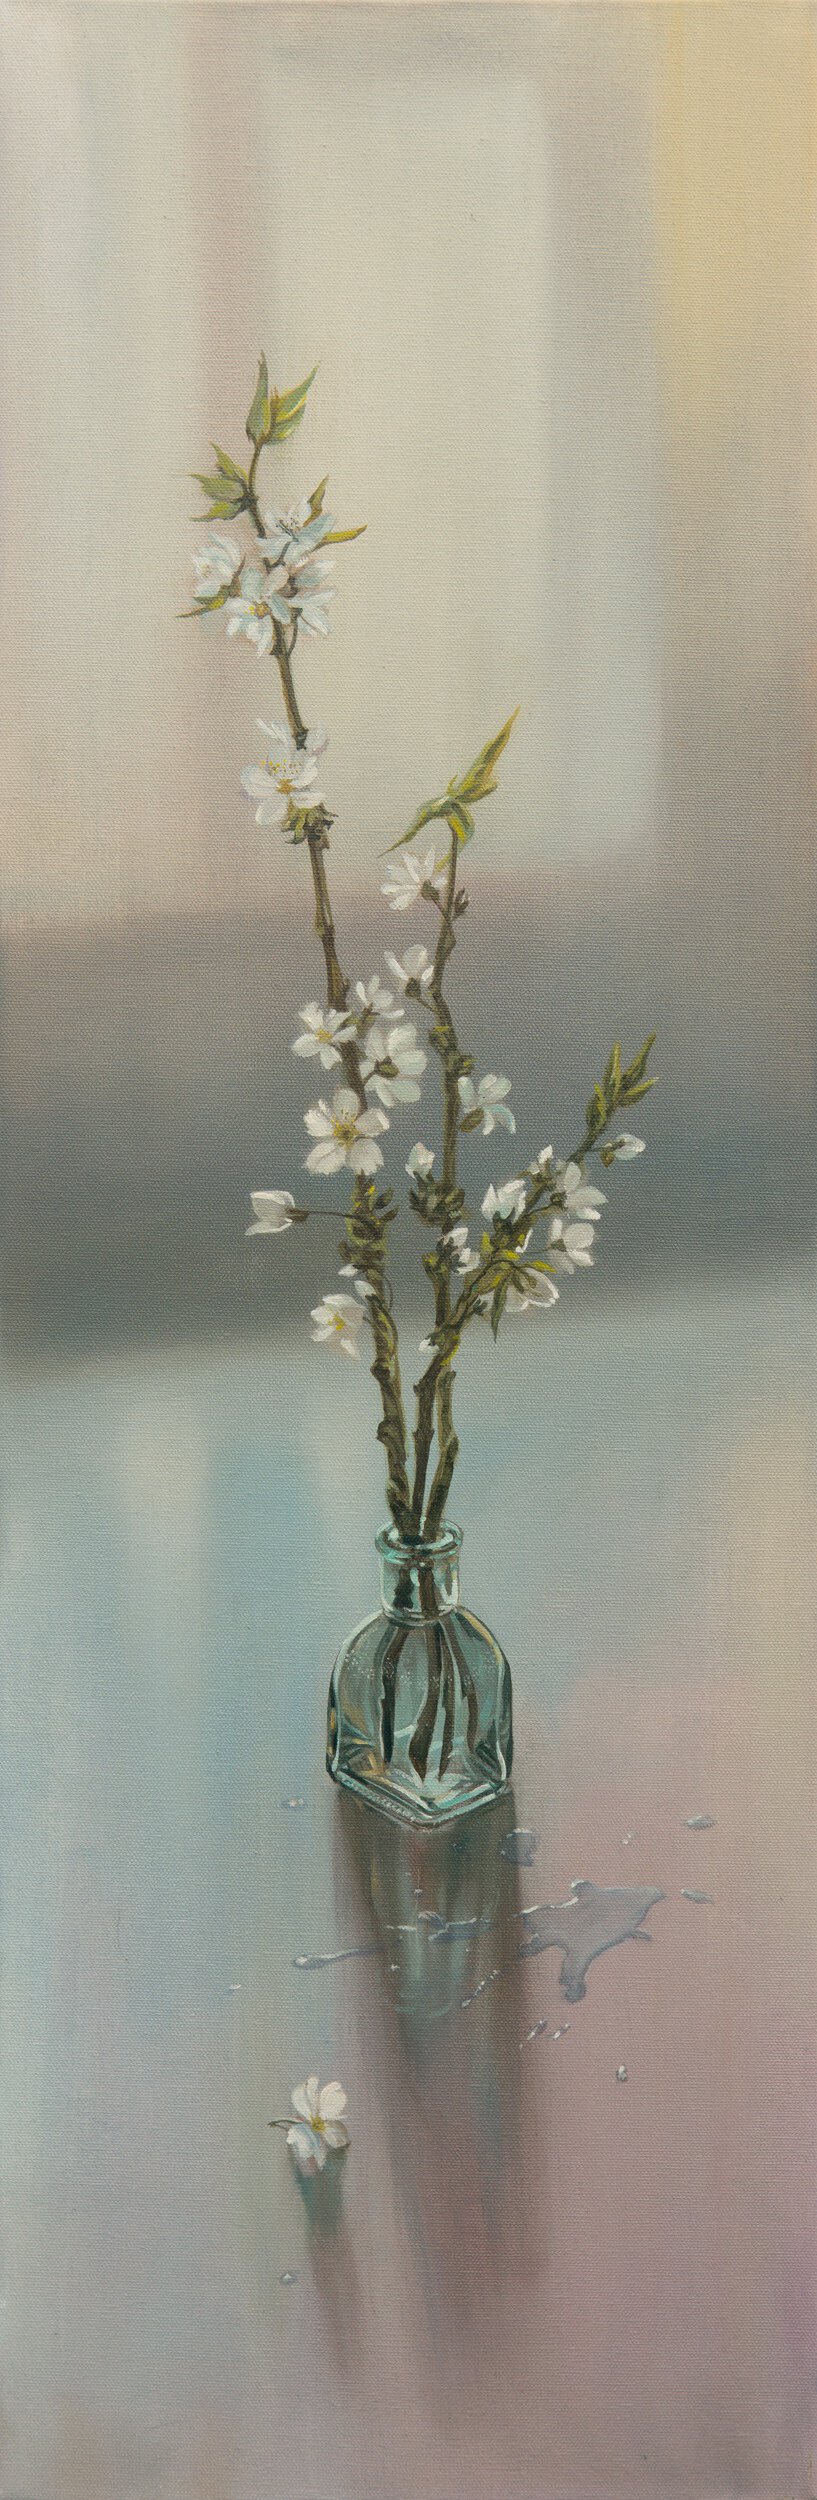 Contemporary Art. Title: Blossom spring, Oil on Canvas, 36 x 12 in by Canadian Artist Ananda Dhama.